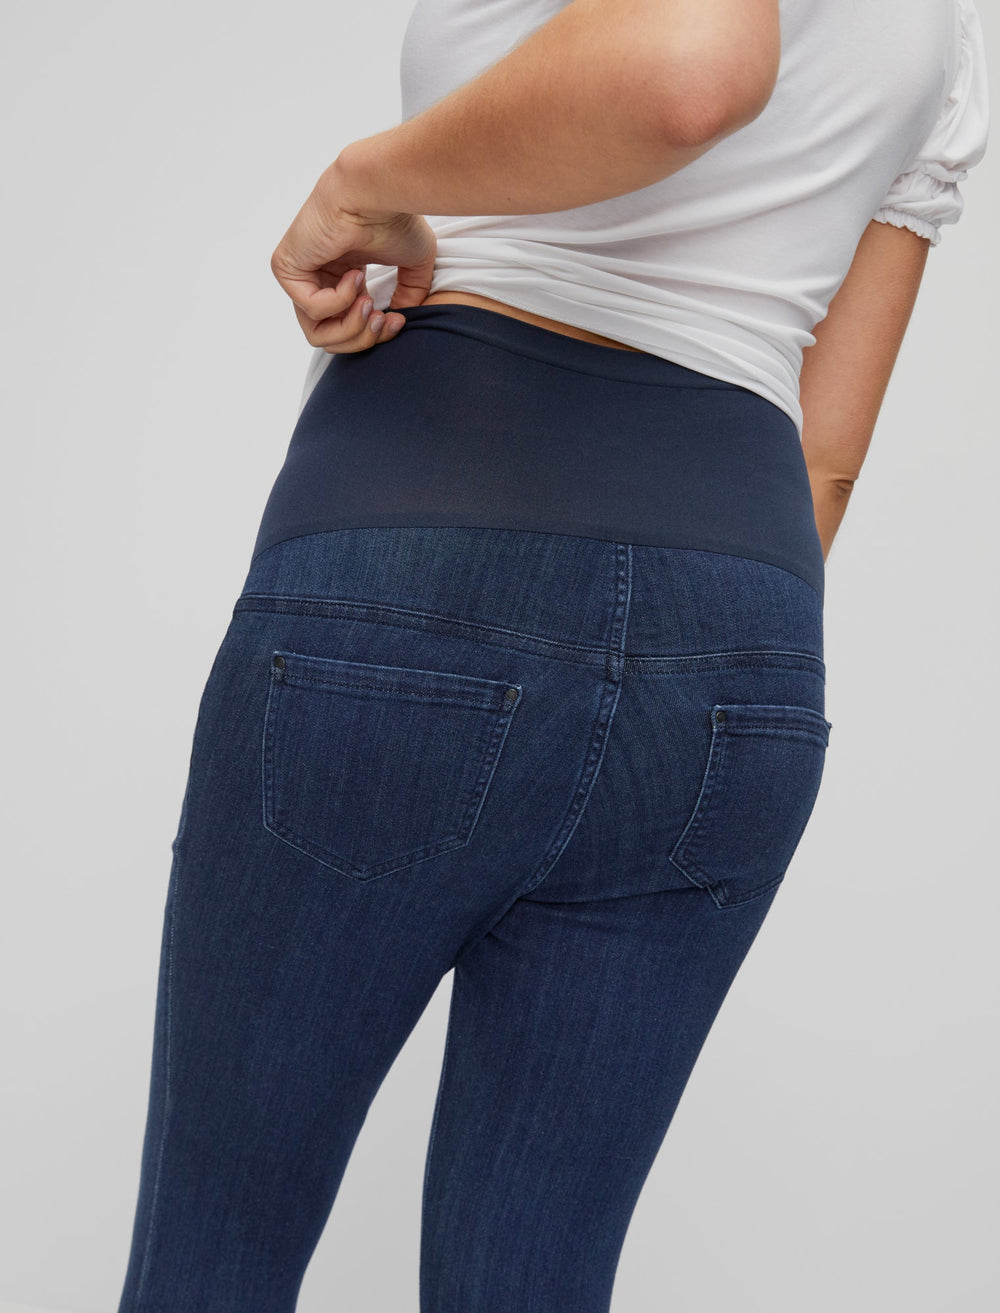 Next Best Thing Jeggings, Navy